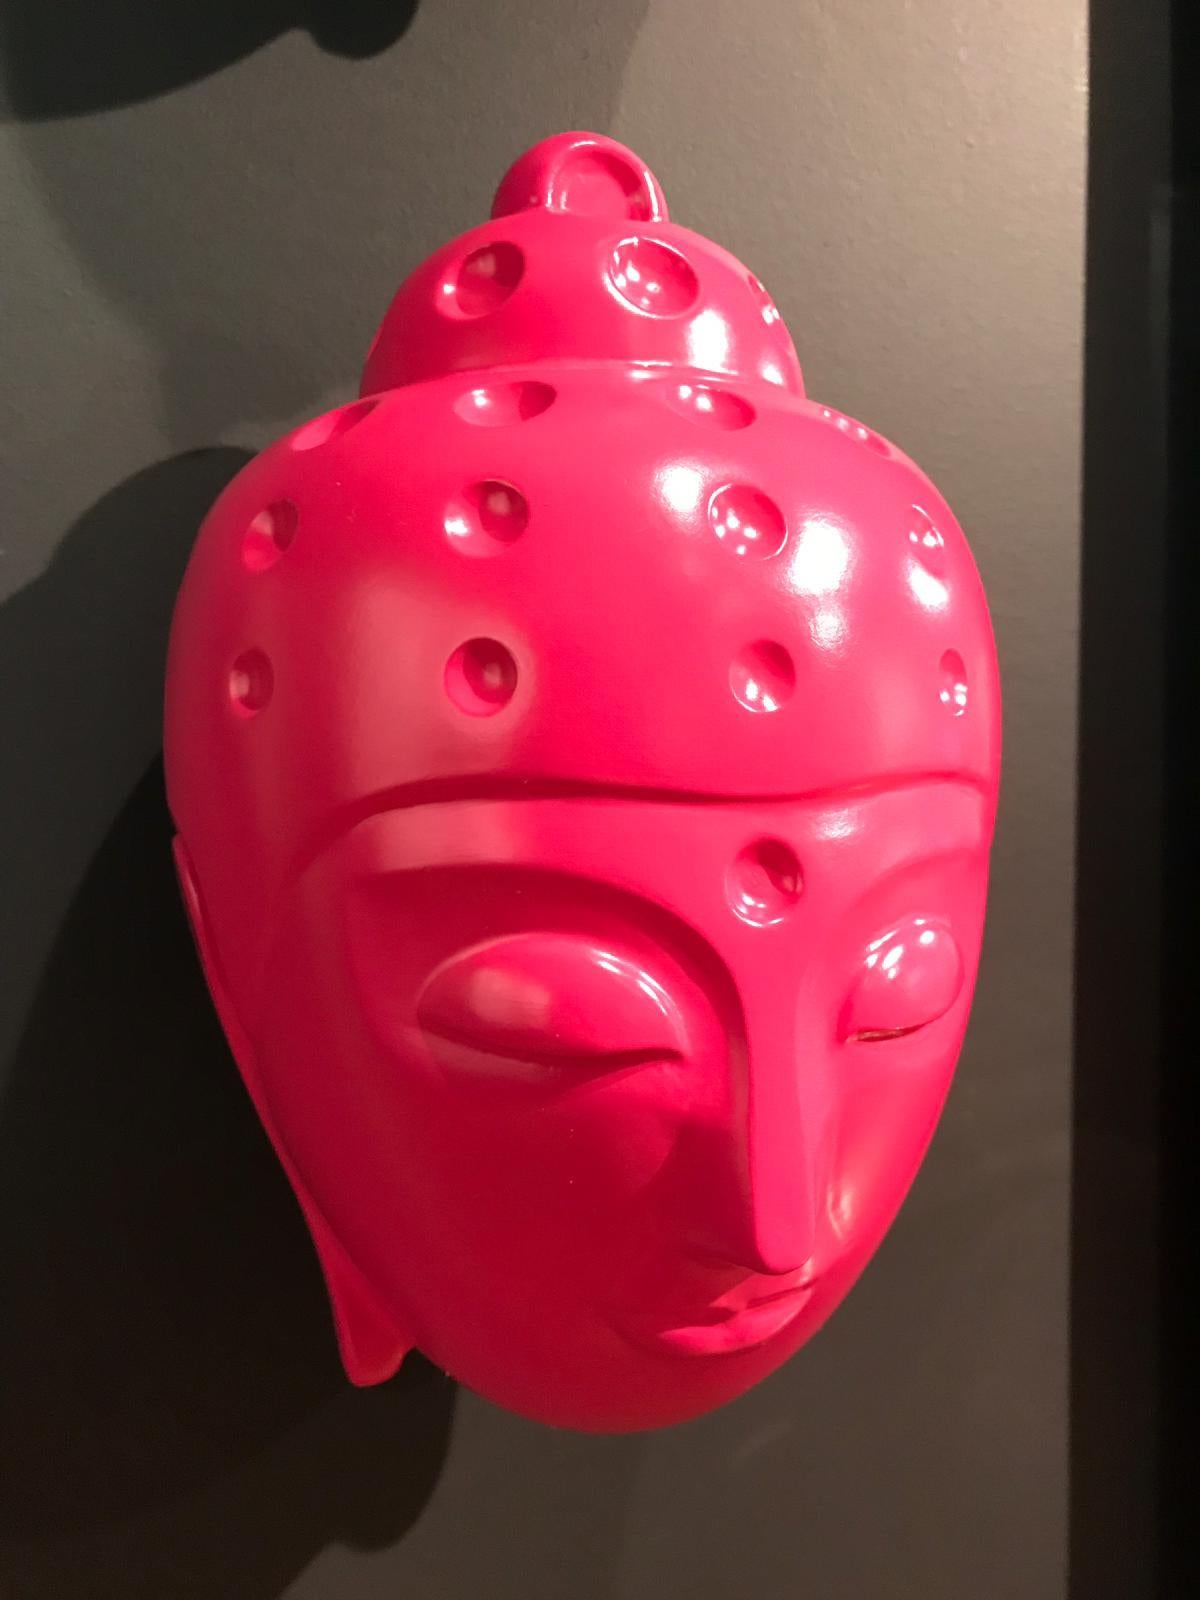 Floating Buddha head Statue - Bright Pink - Sculpture by Tal Nehoray